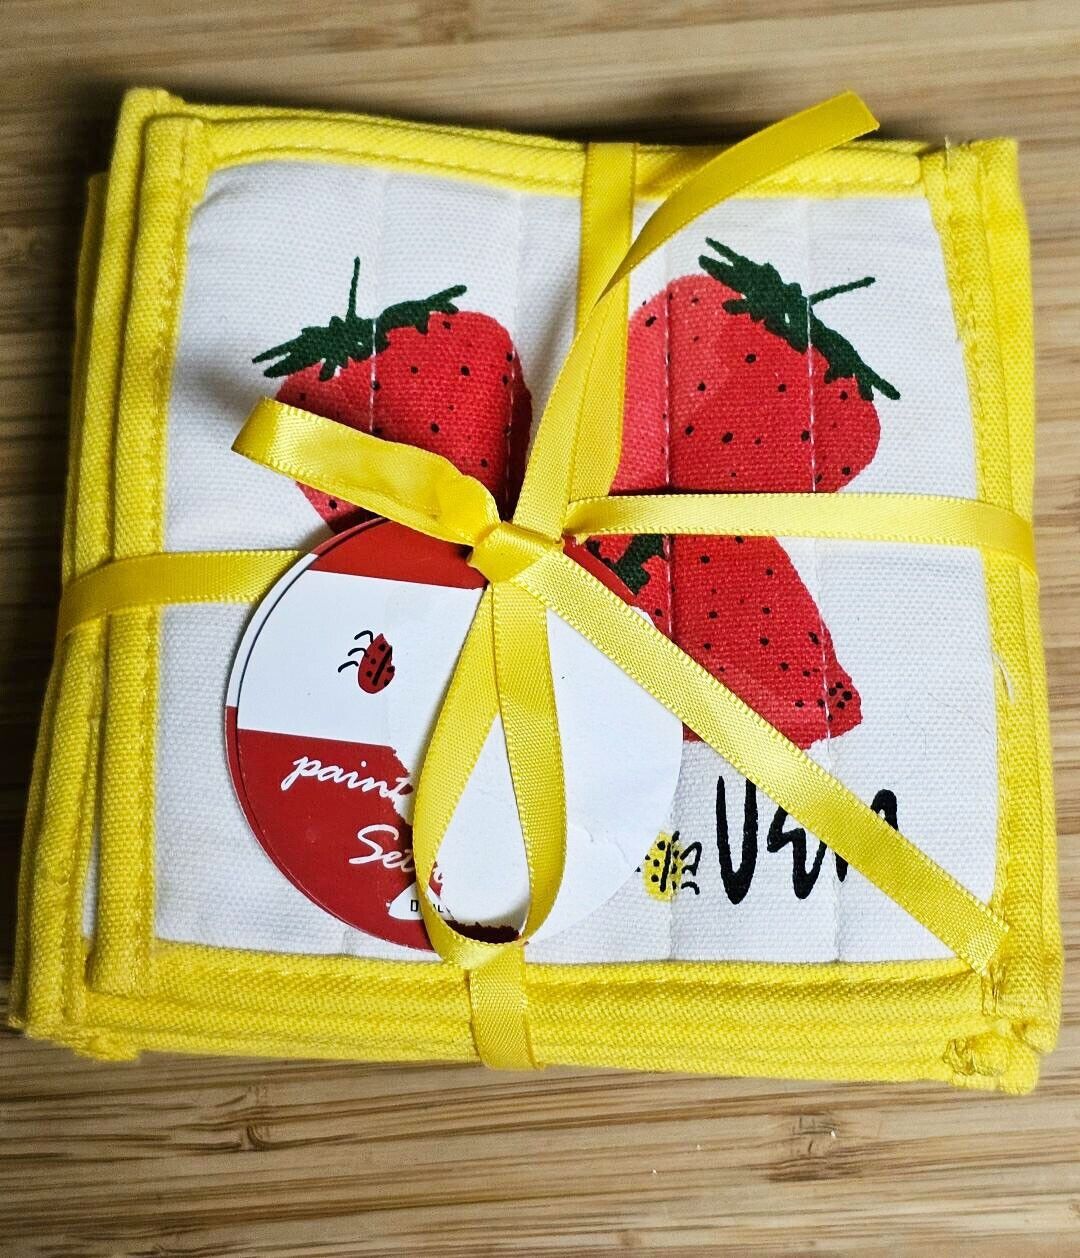 NEW VERA NEUMANN LICENSED 8 PIECE PADDED REVERSIBLE FRUIT COASTERS LADY BUG